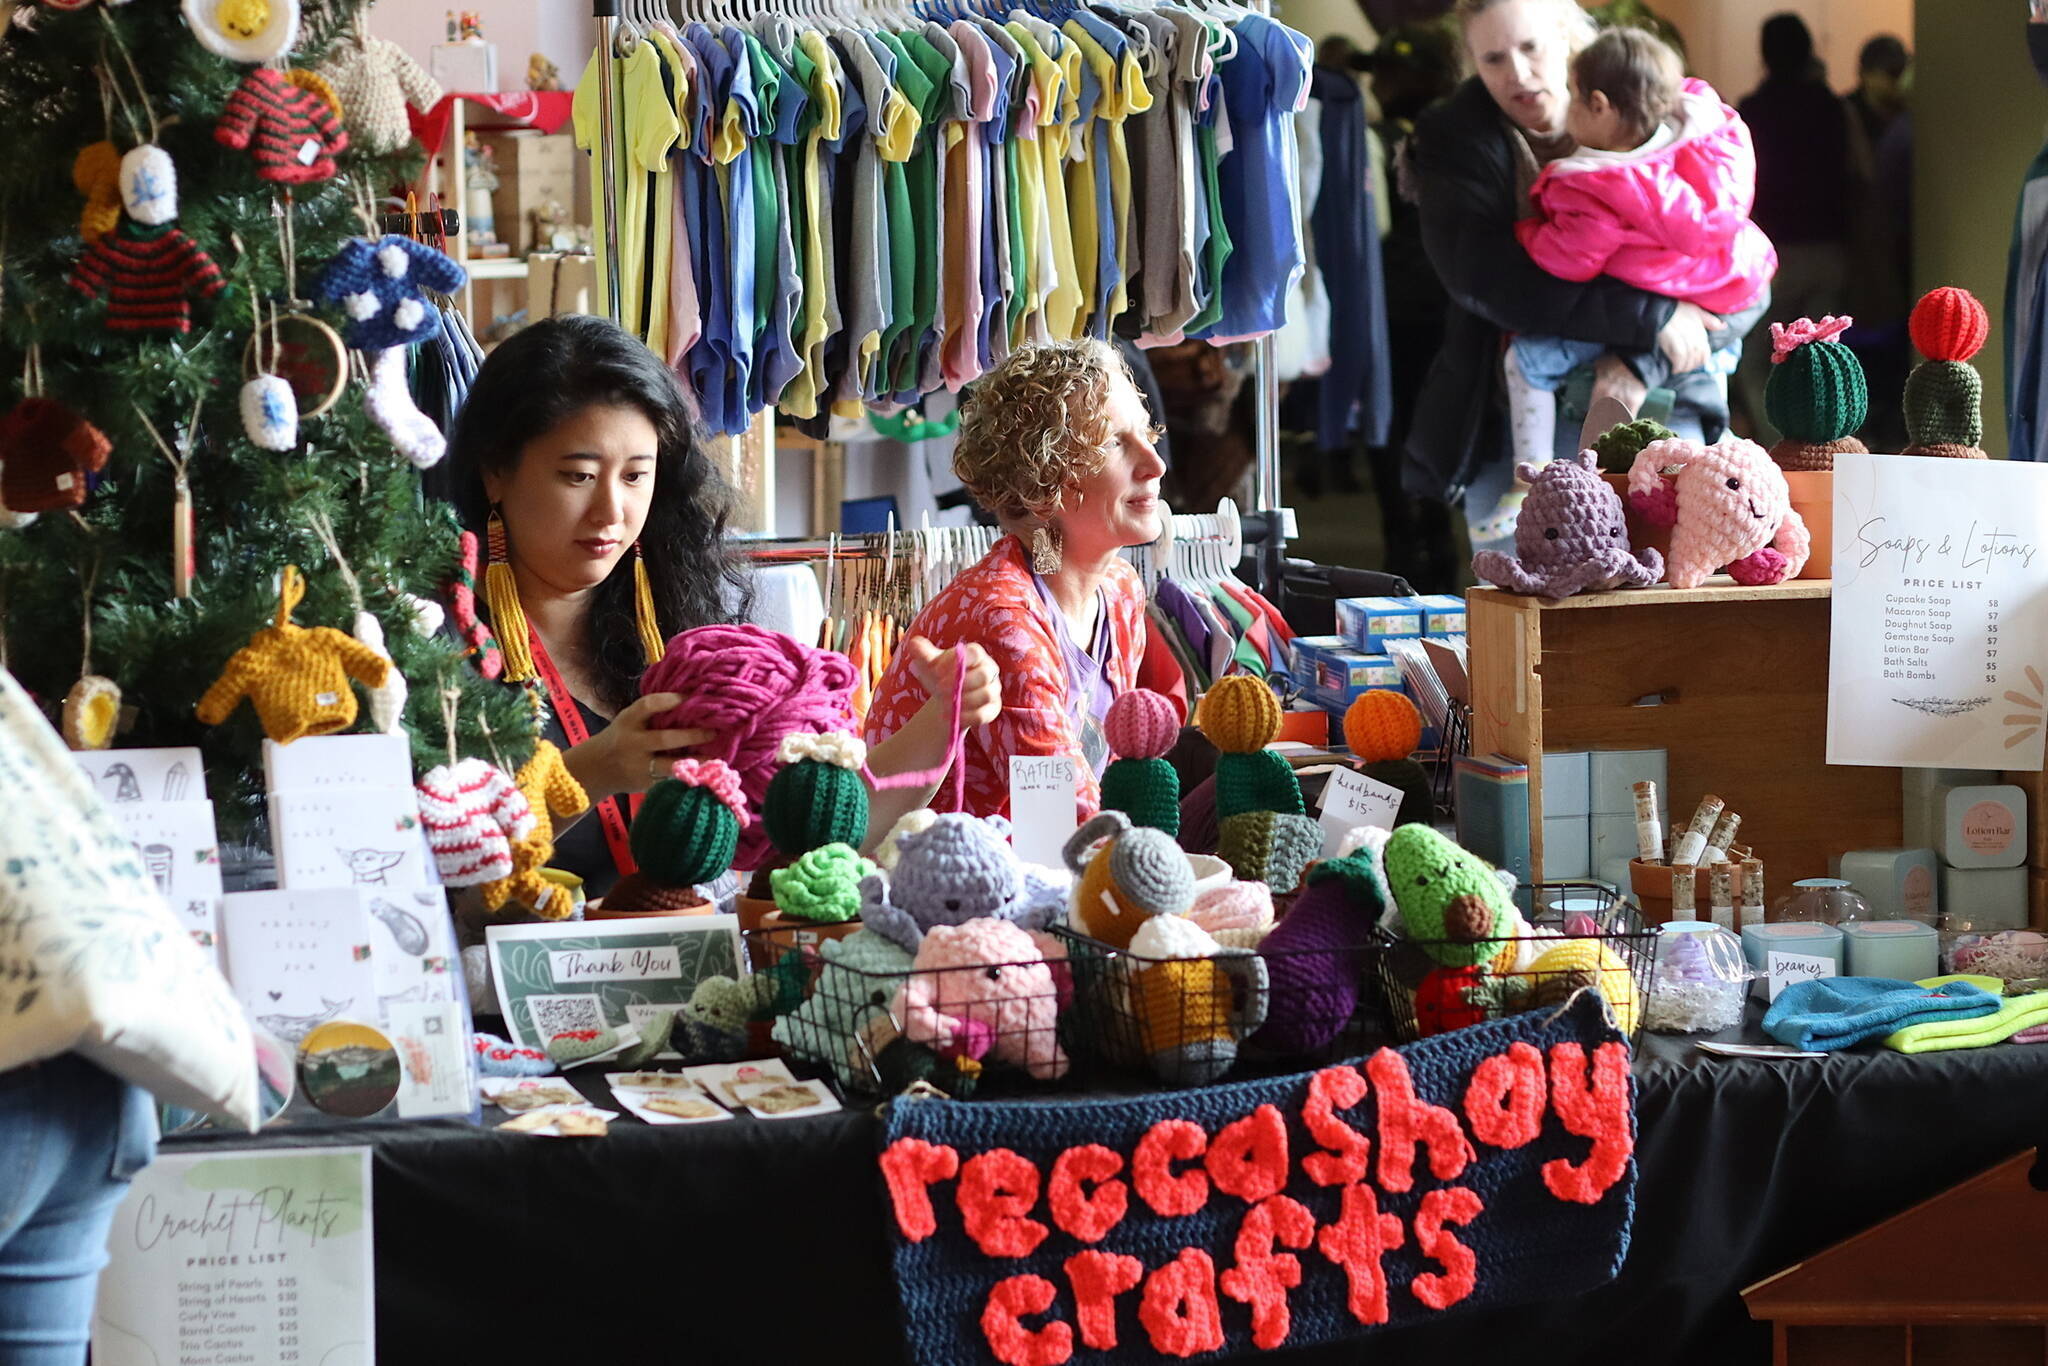 Rebecca Hsieh, left, knits small gifts as a first-time vendor at the Juneau Public Market as her friend, MK MacNaughton, a longtime vendor sells hand-painted items near the entrance of Centennial Hall on Nov. 26, 2022. (Mark Sabbatini / Juneau Empire File)